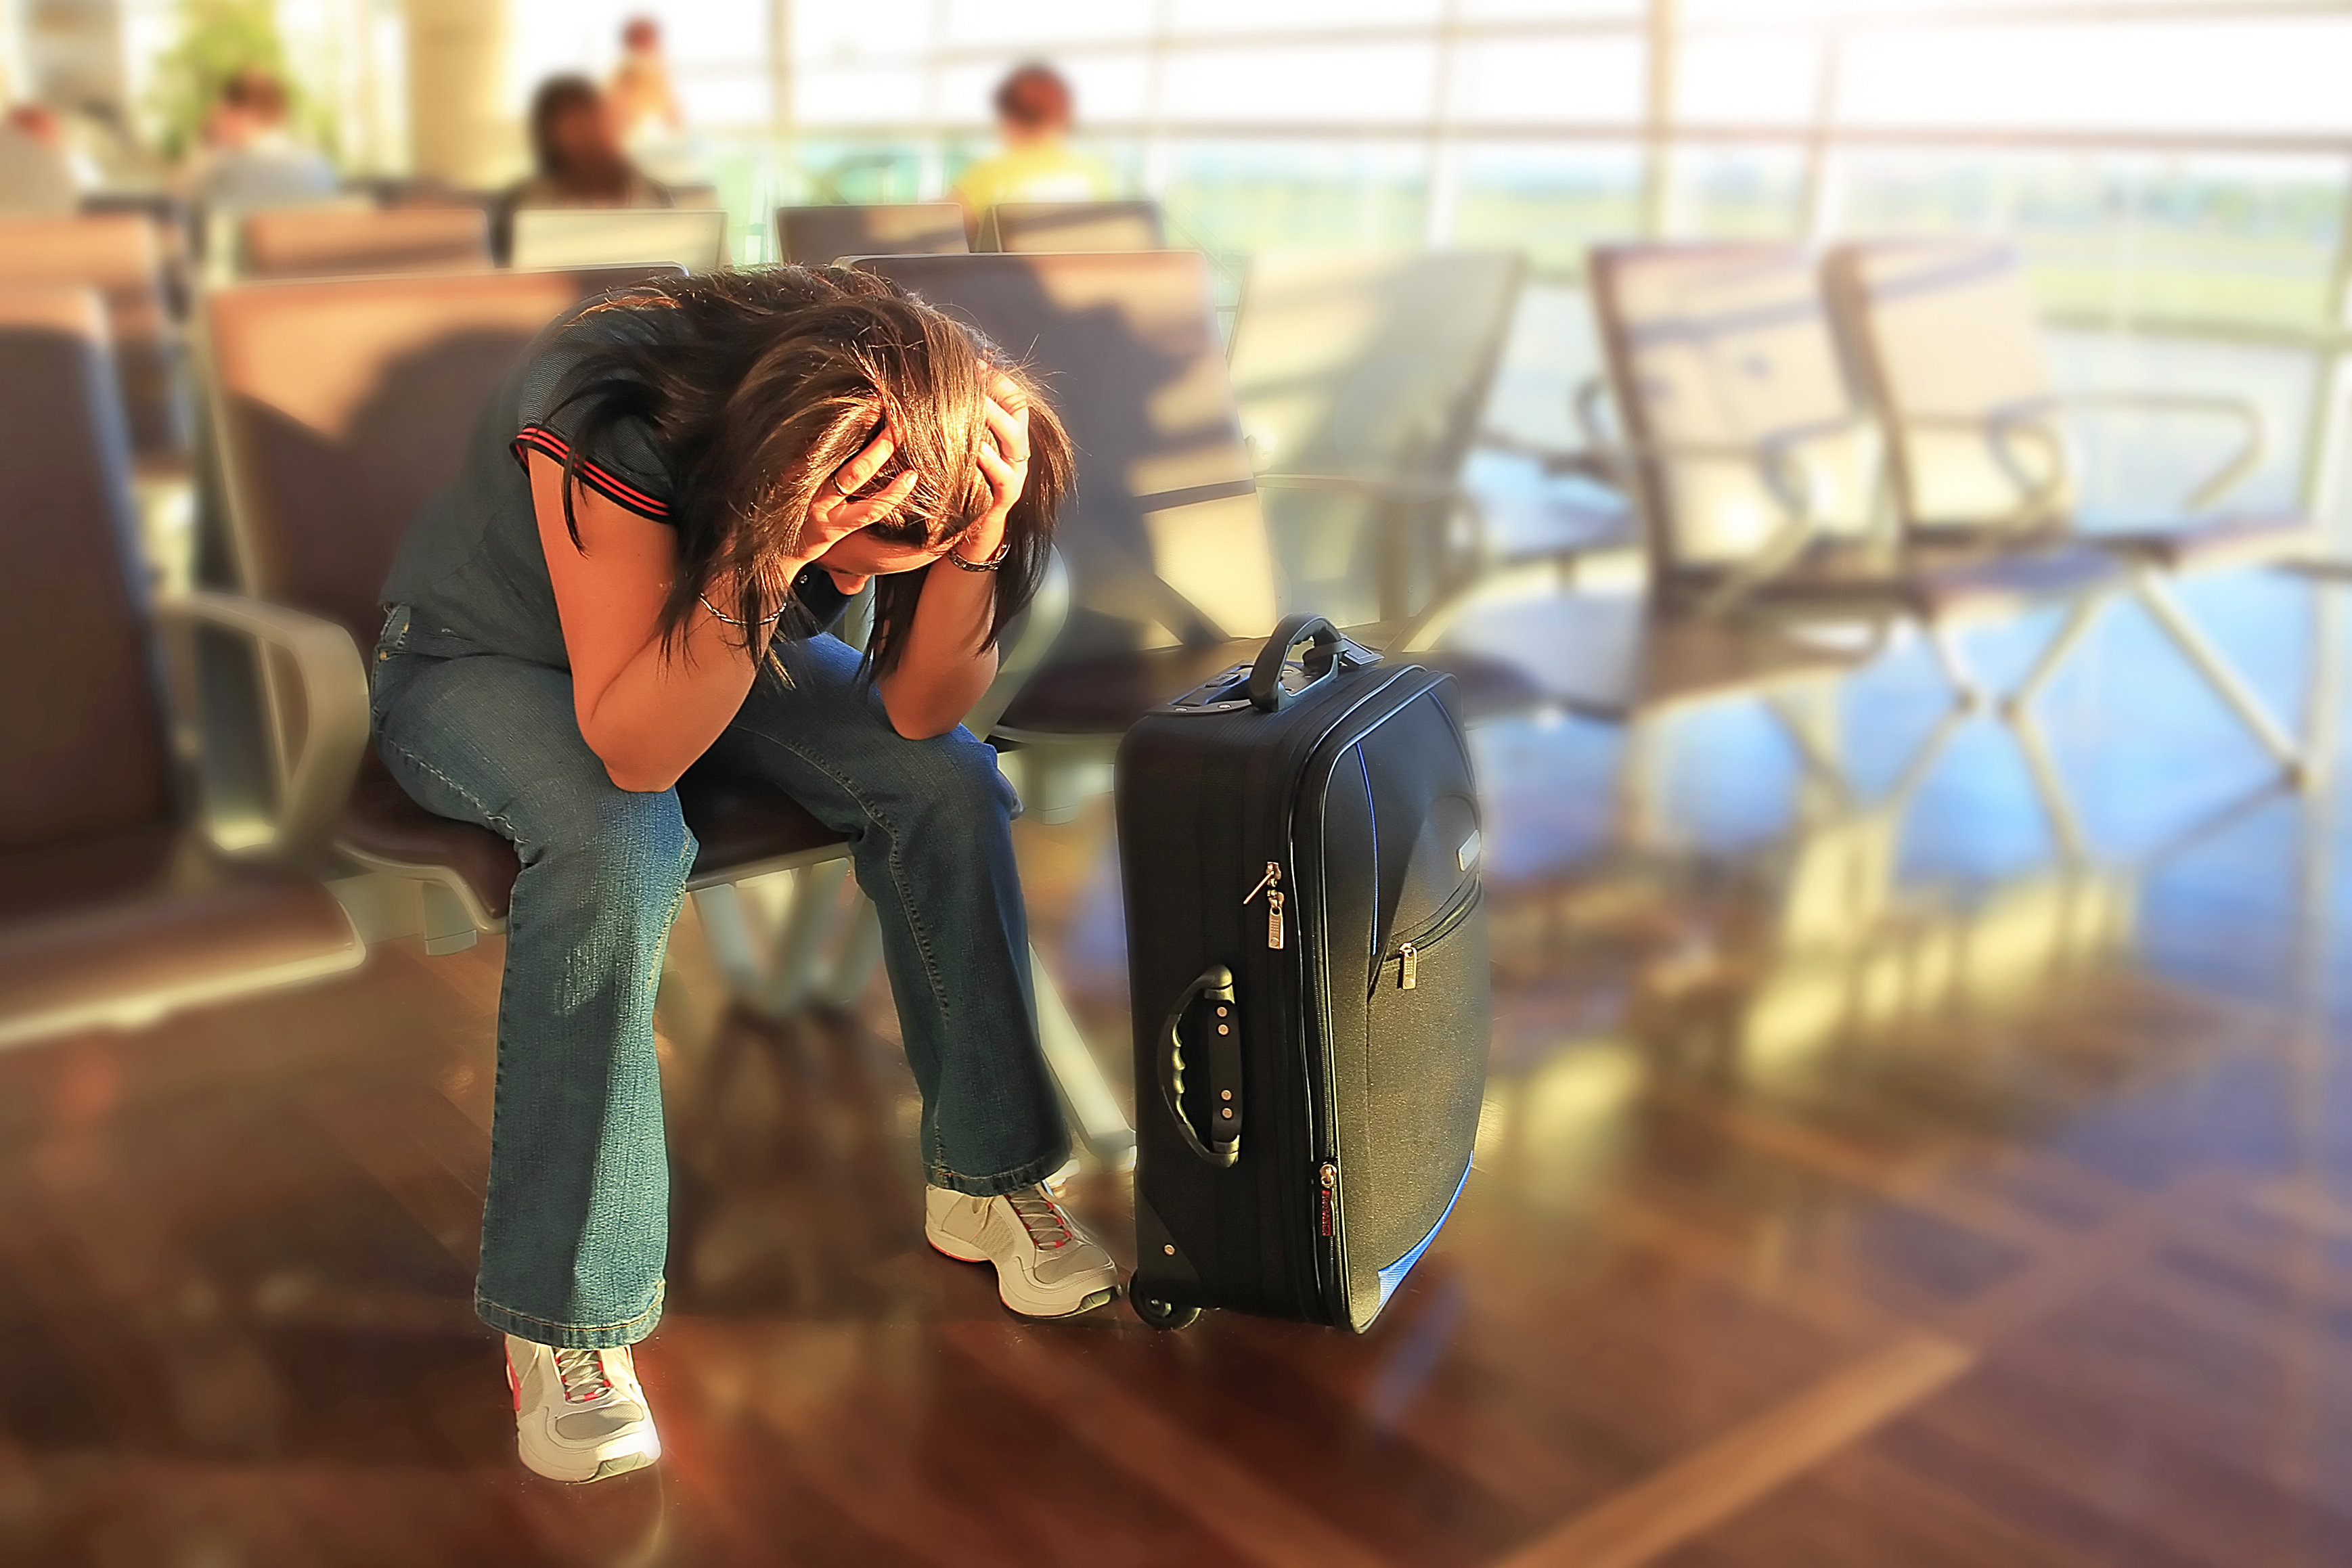 Lost your baggage? Be prepared for contingencies while travelling